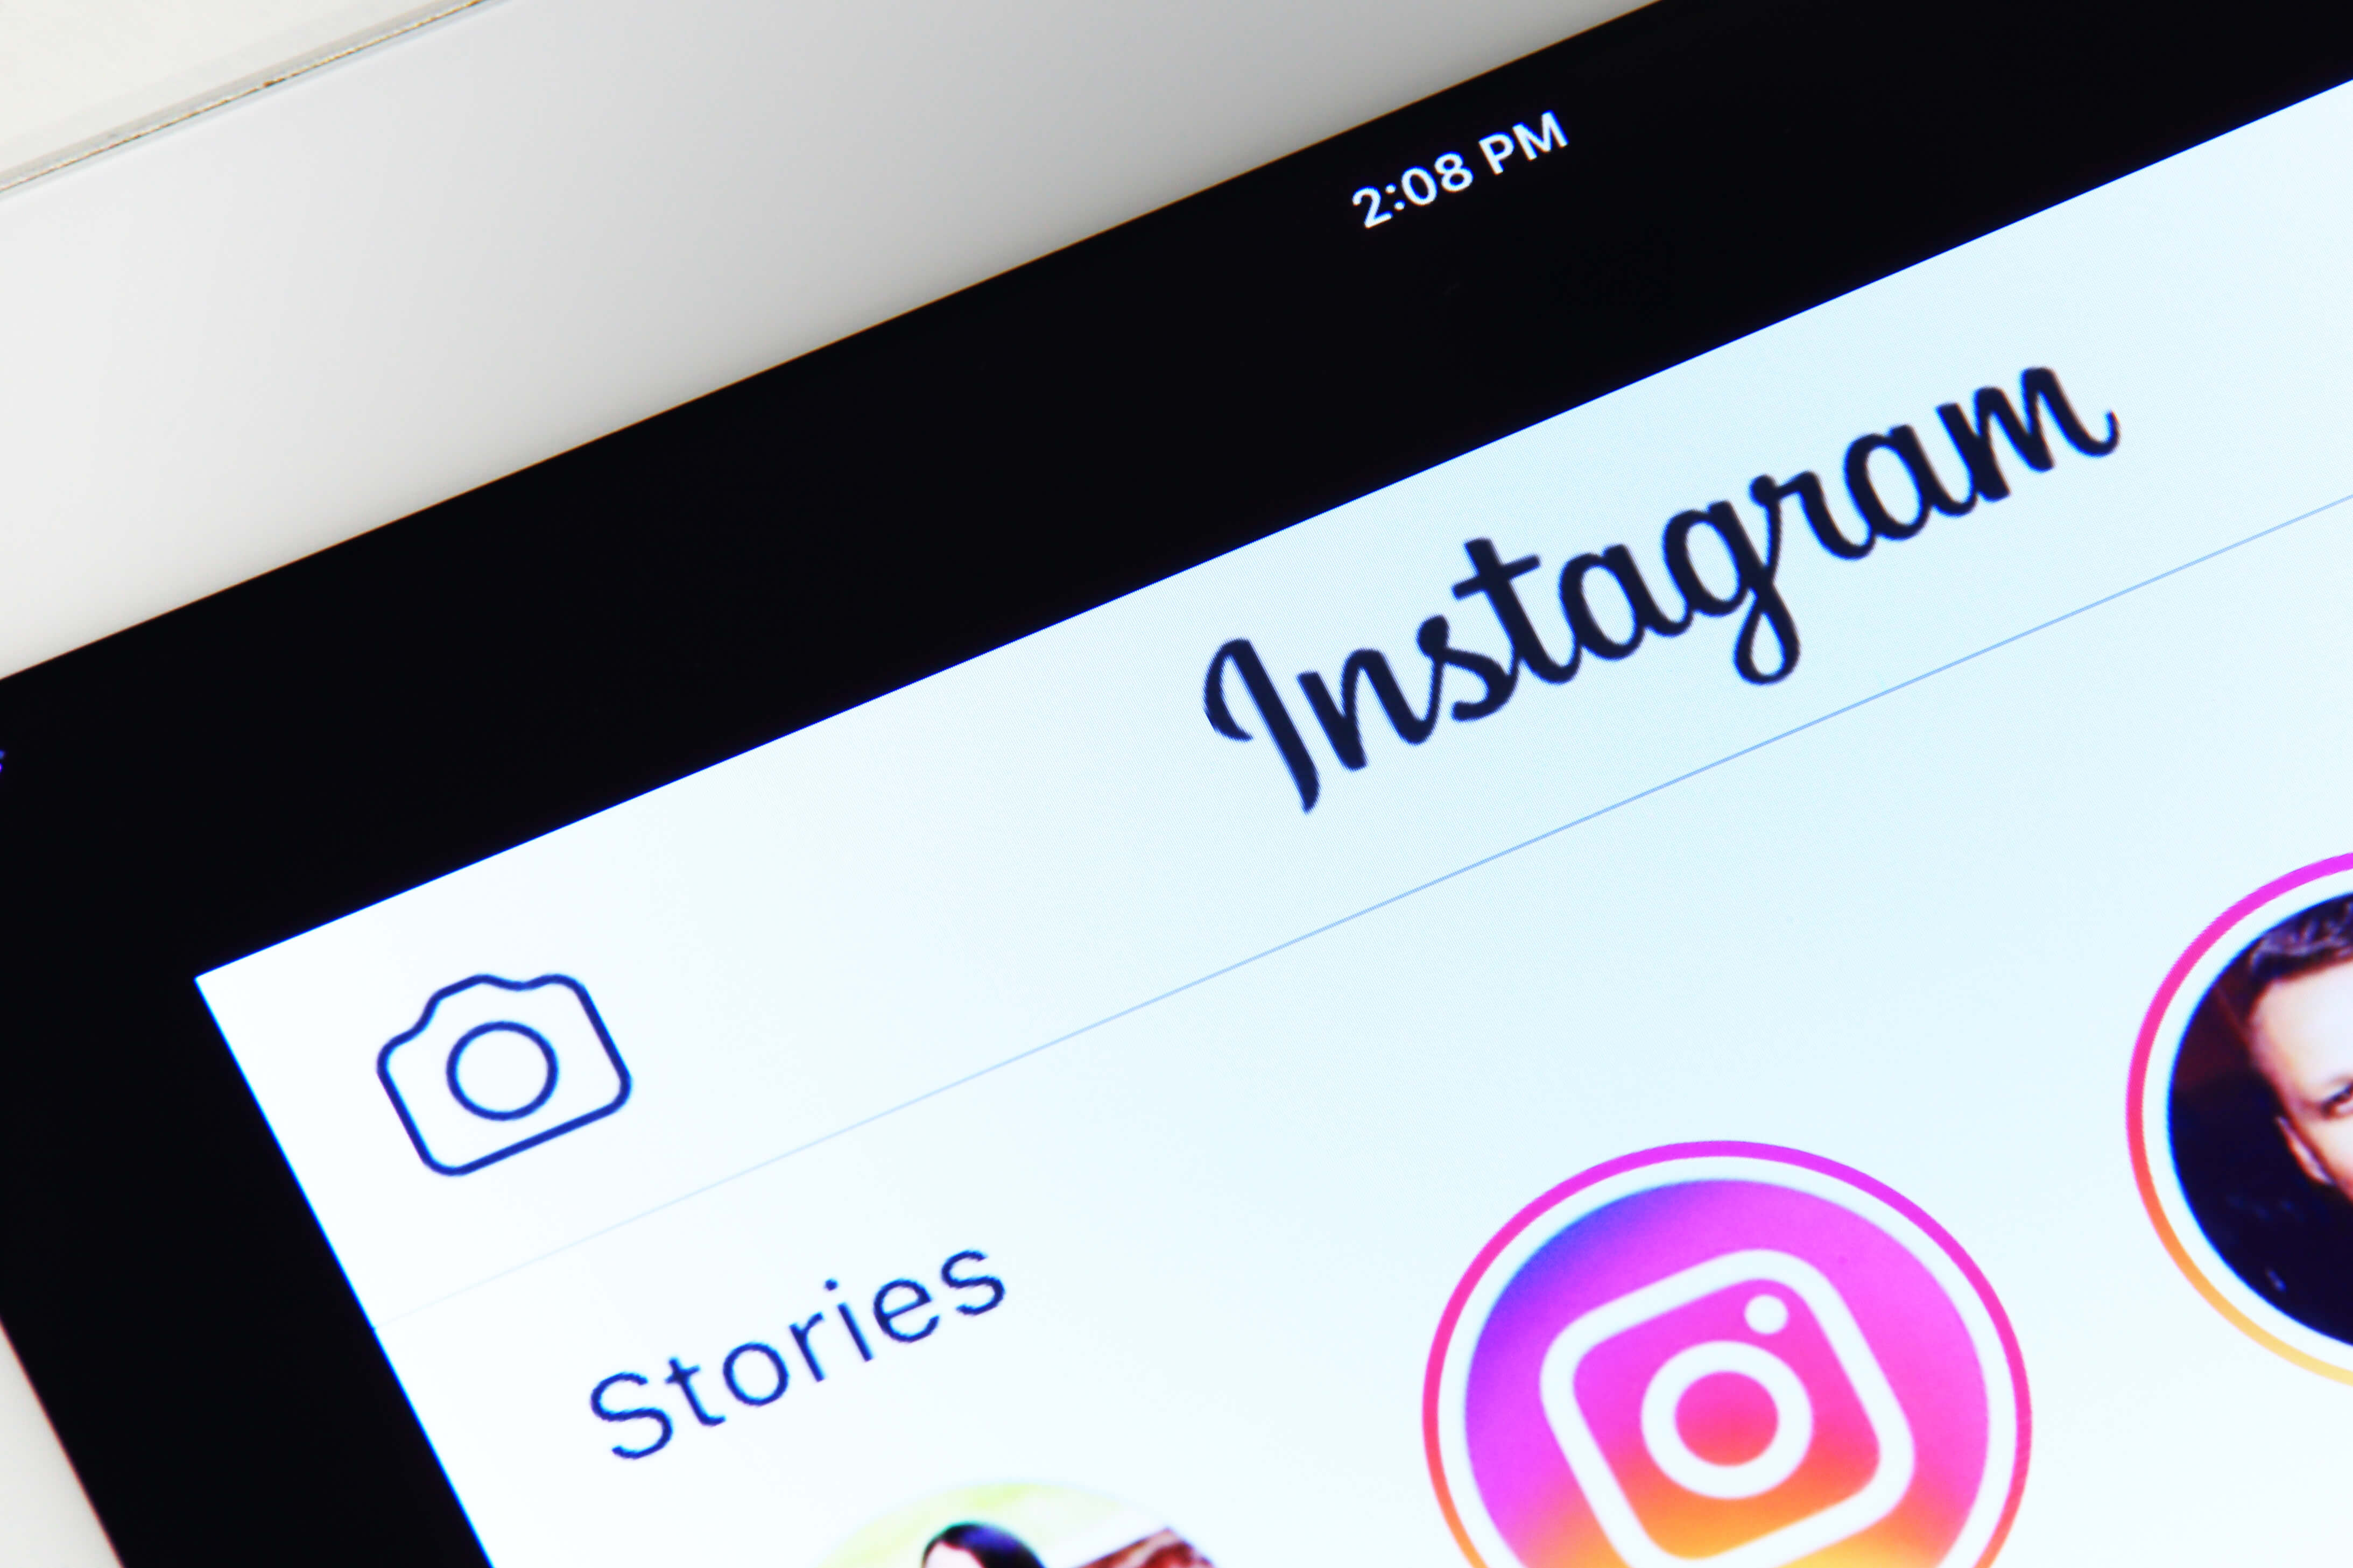 Instagram and social media makes visual search and effective channel